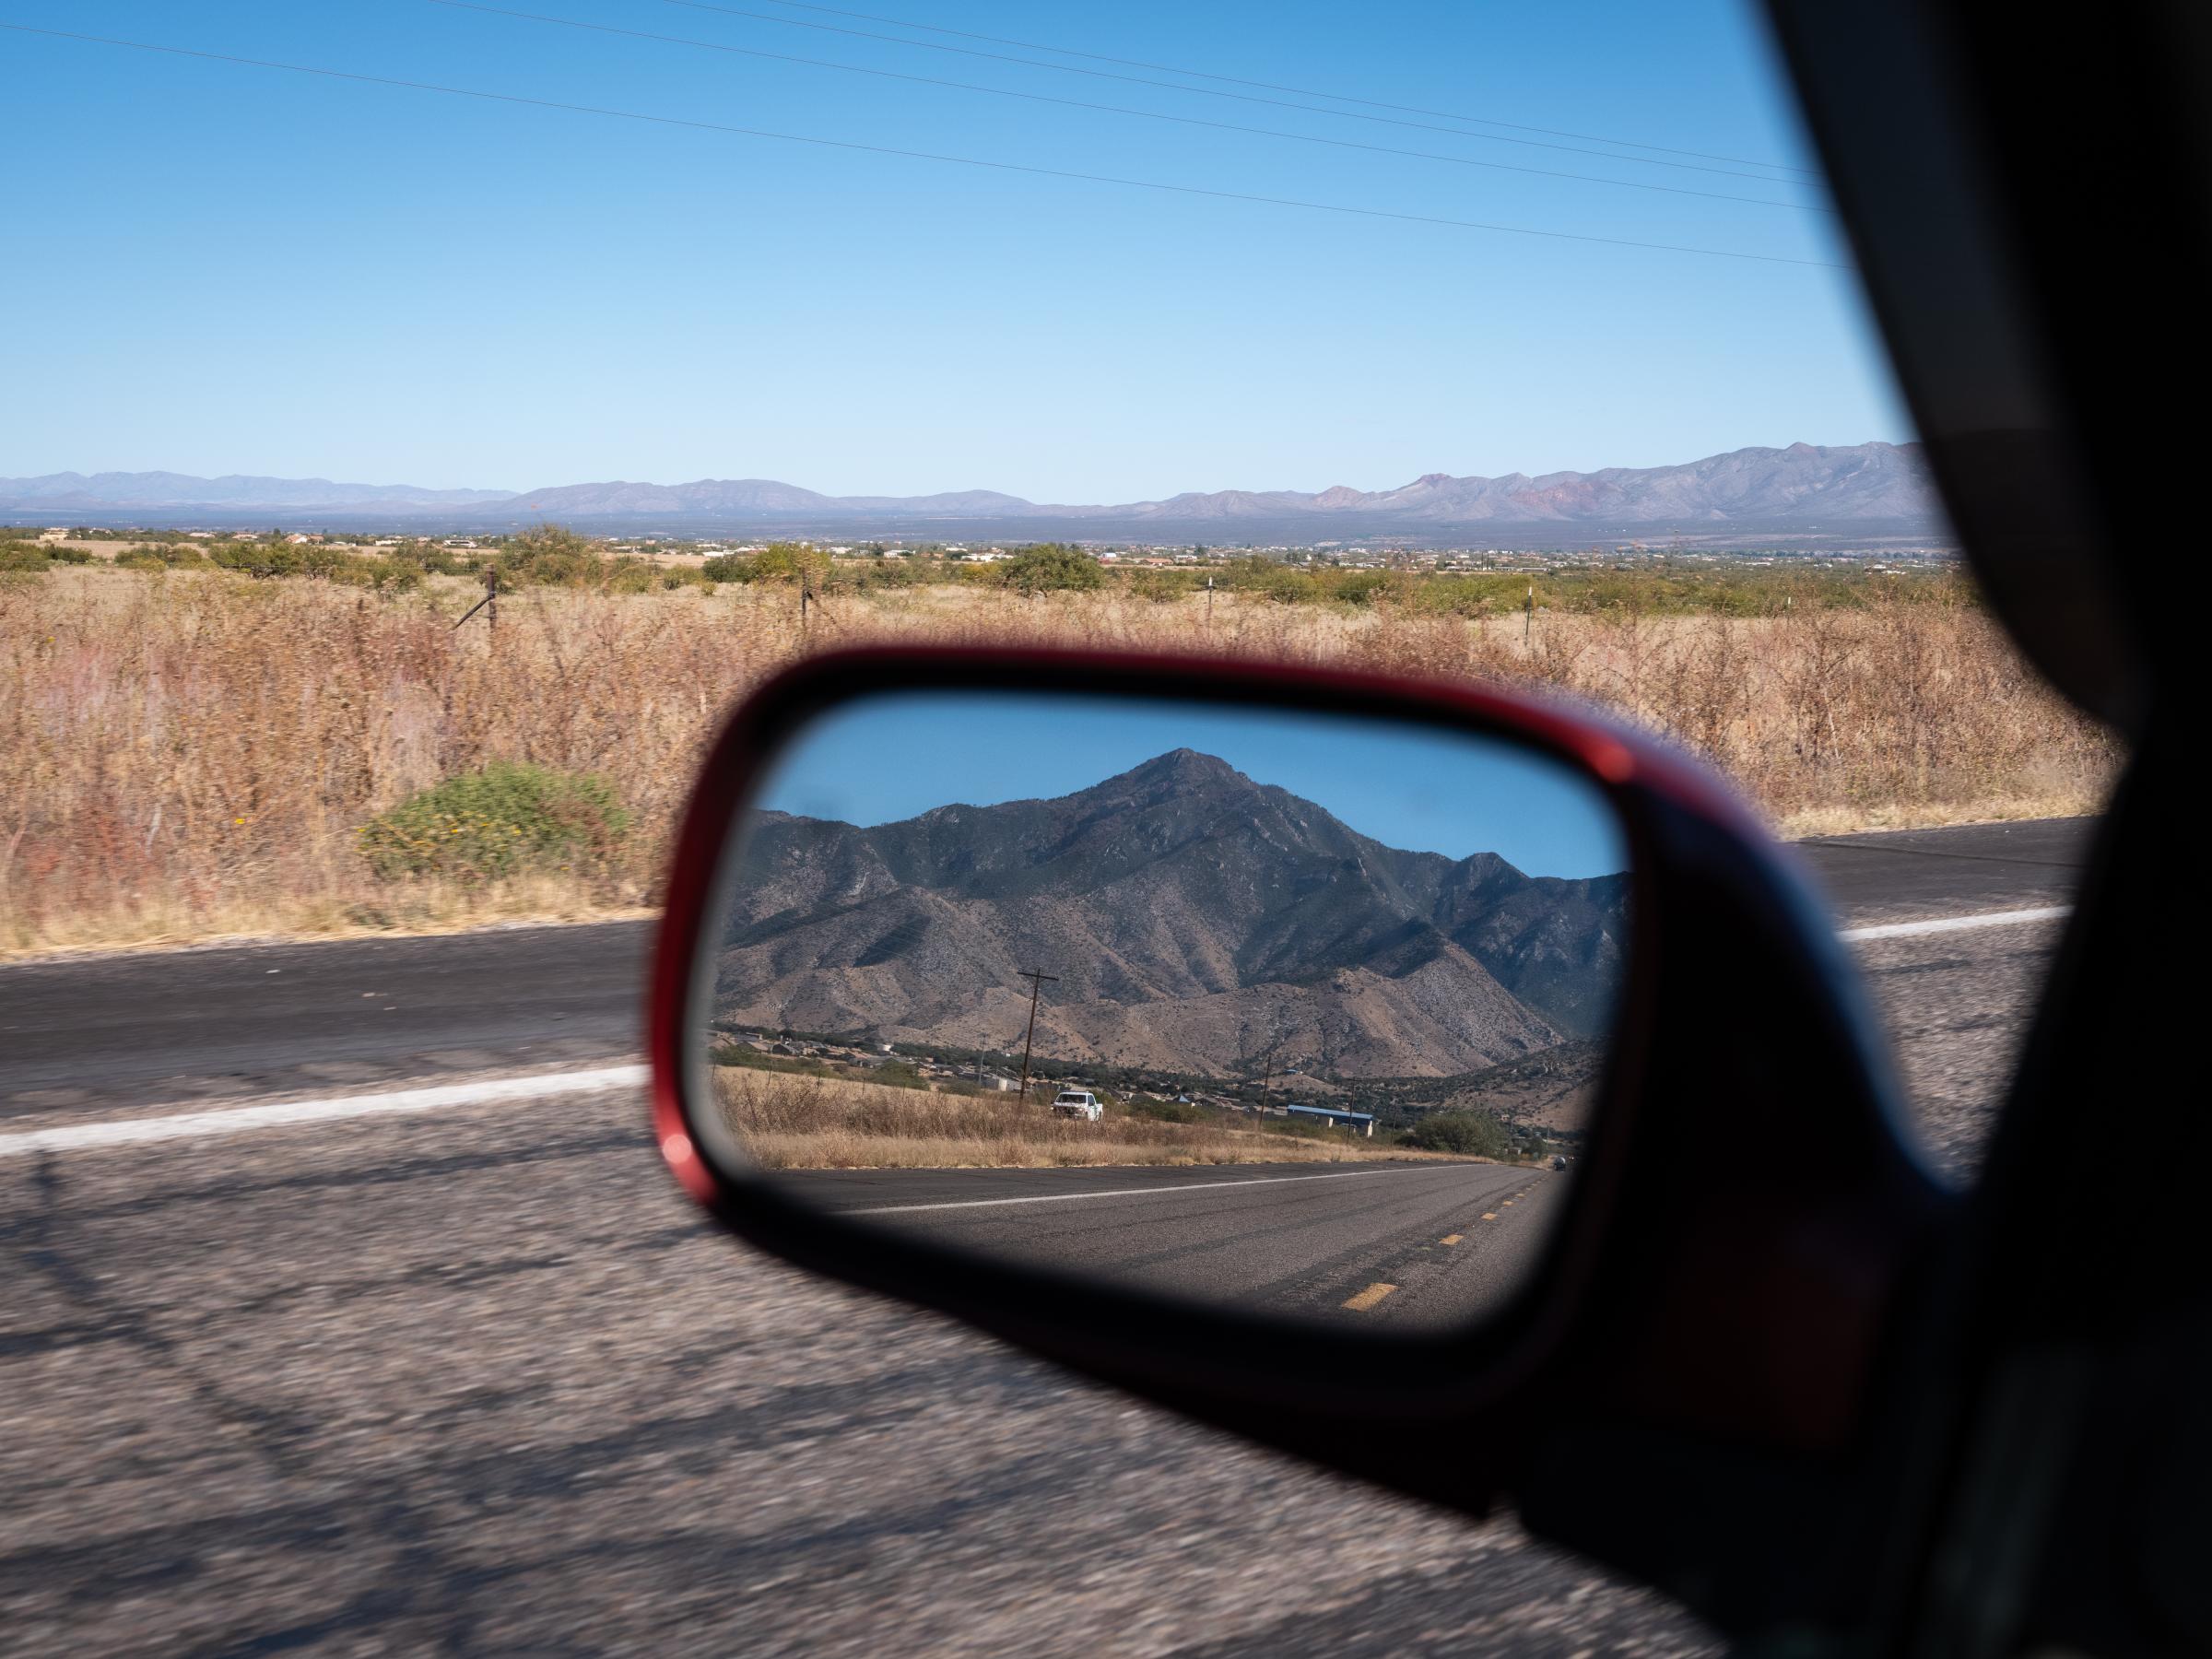 A border patrol vehicle is seen in the side mirror of a car driving along Rt. 92 in Hereford, AZ. Rt. 92 is a common pickup point for migrants...